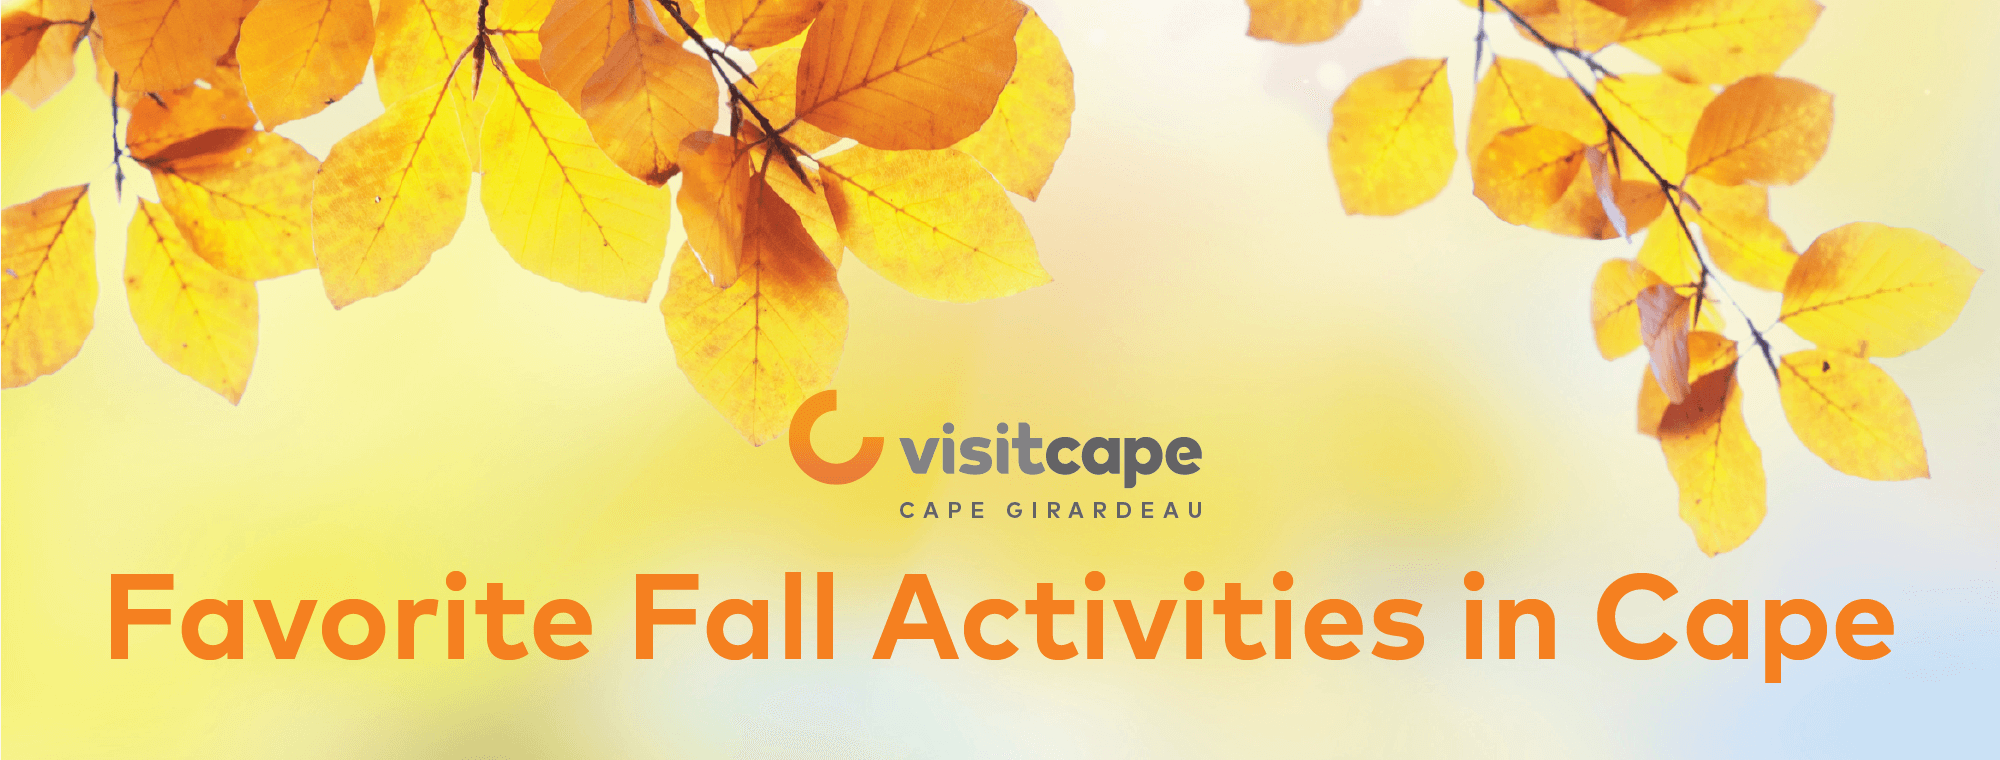 the words, "Favorite Fall Activities in Cape" with a background of autumn leaves